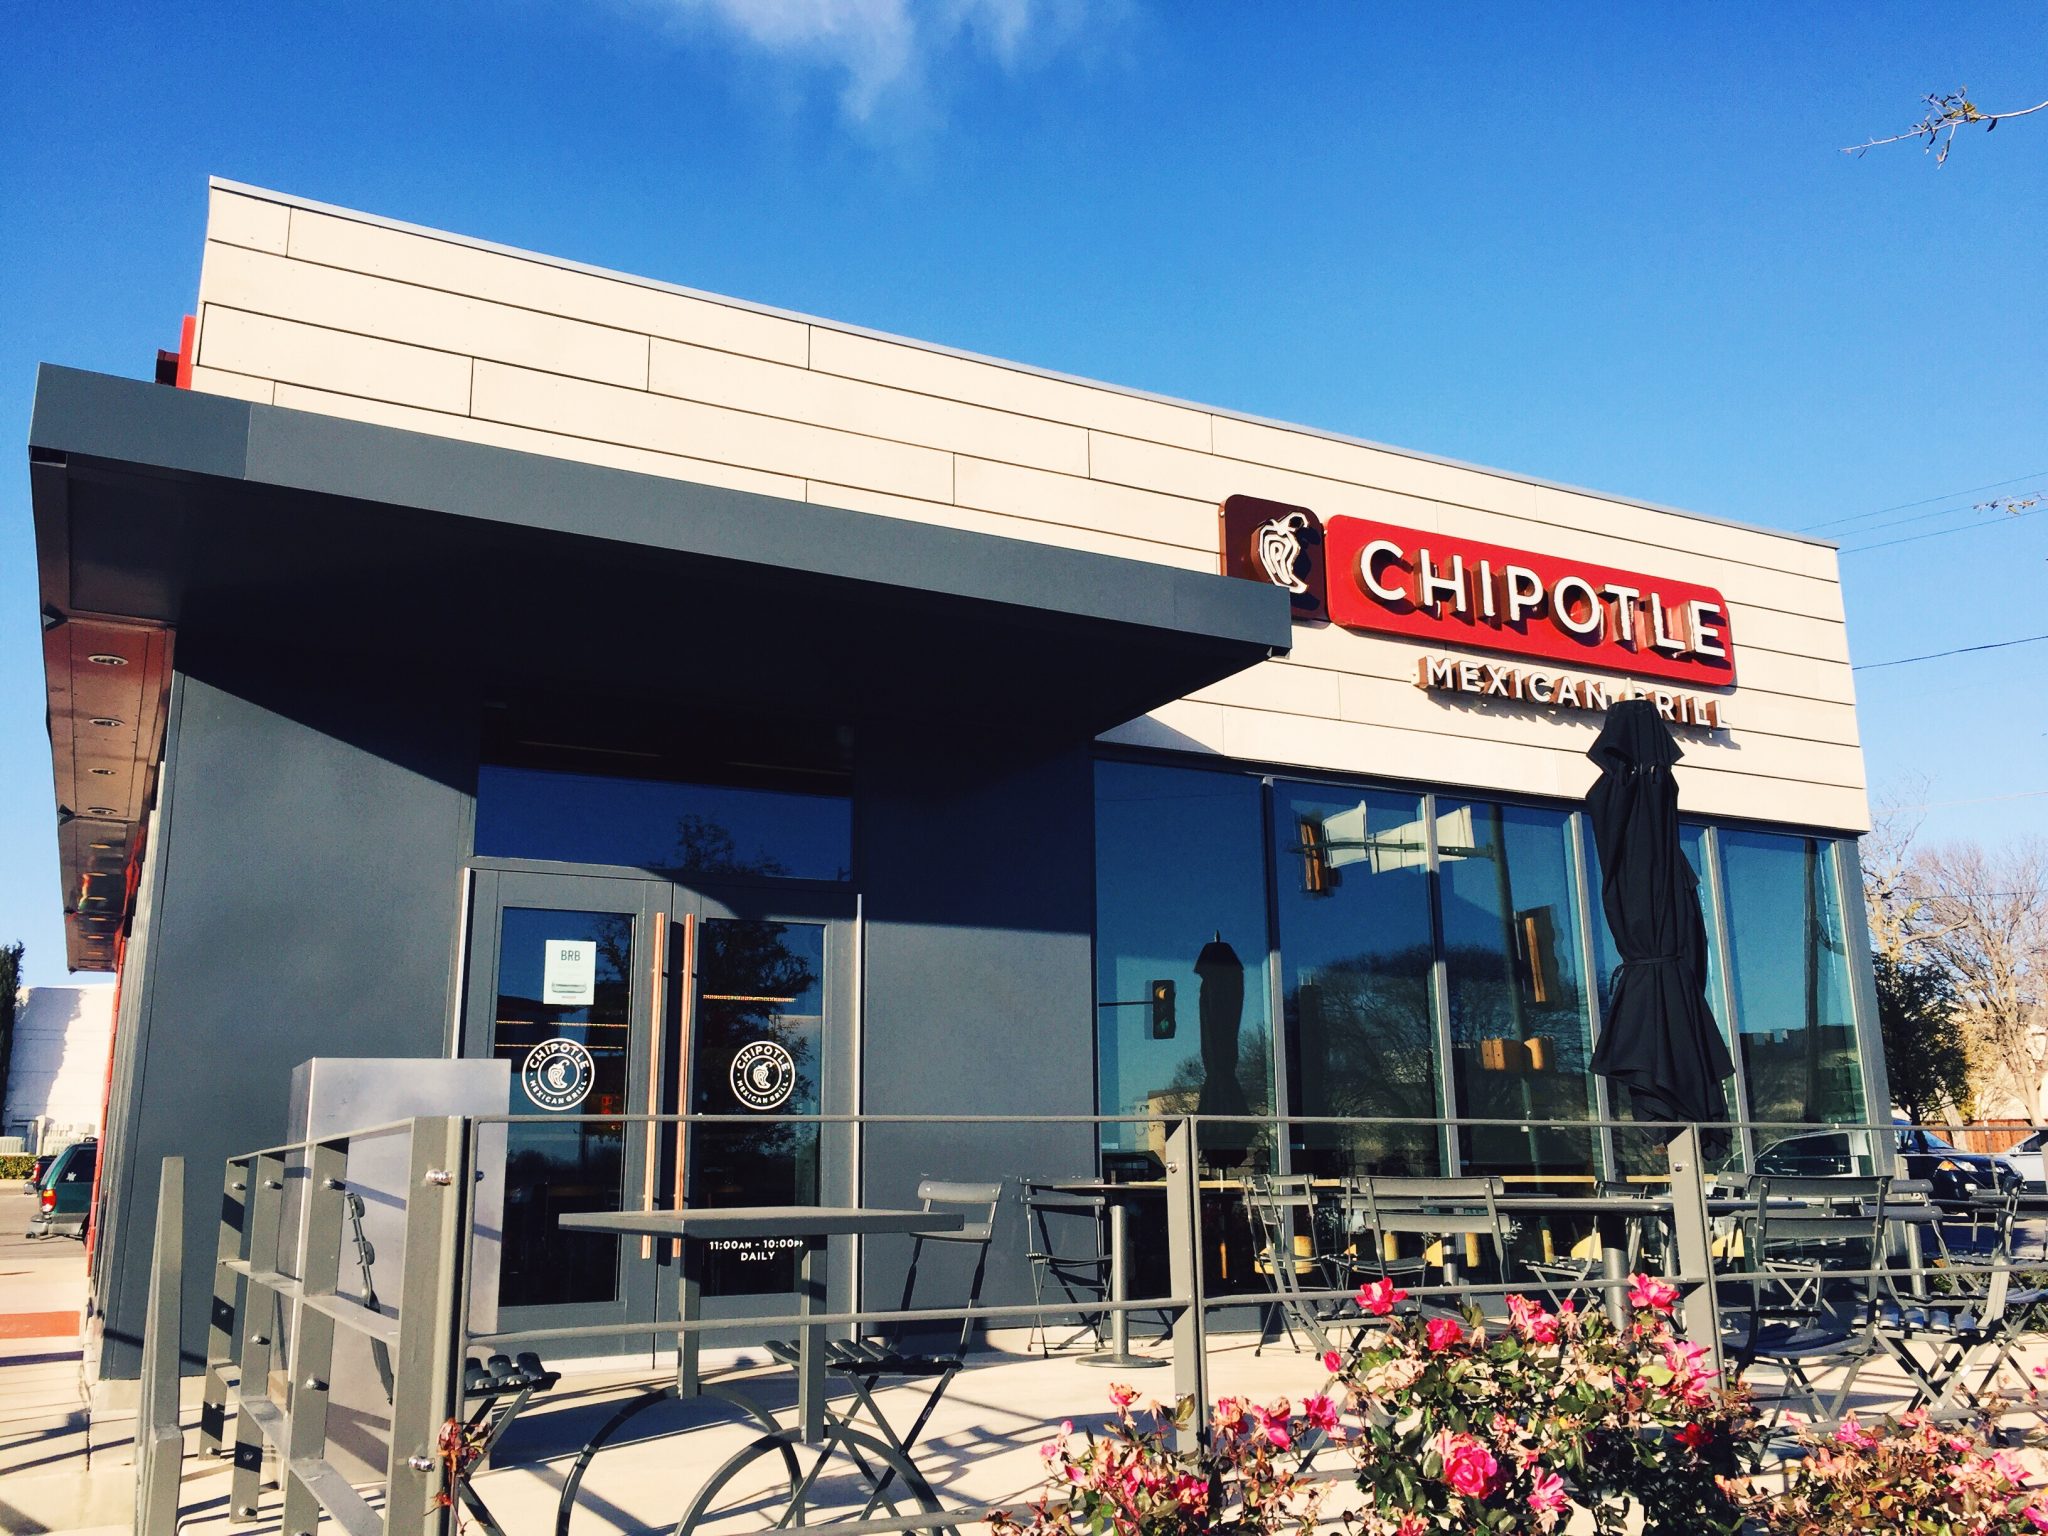 Chipotle (photo by Brittany Nunn)